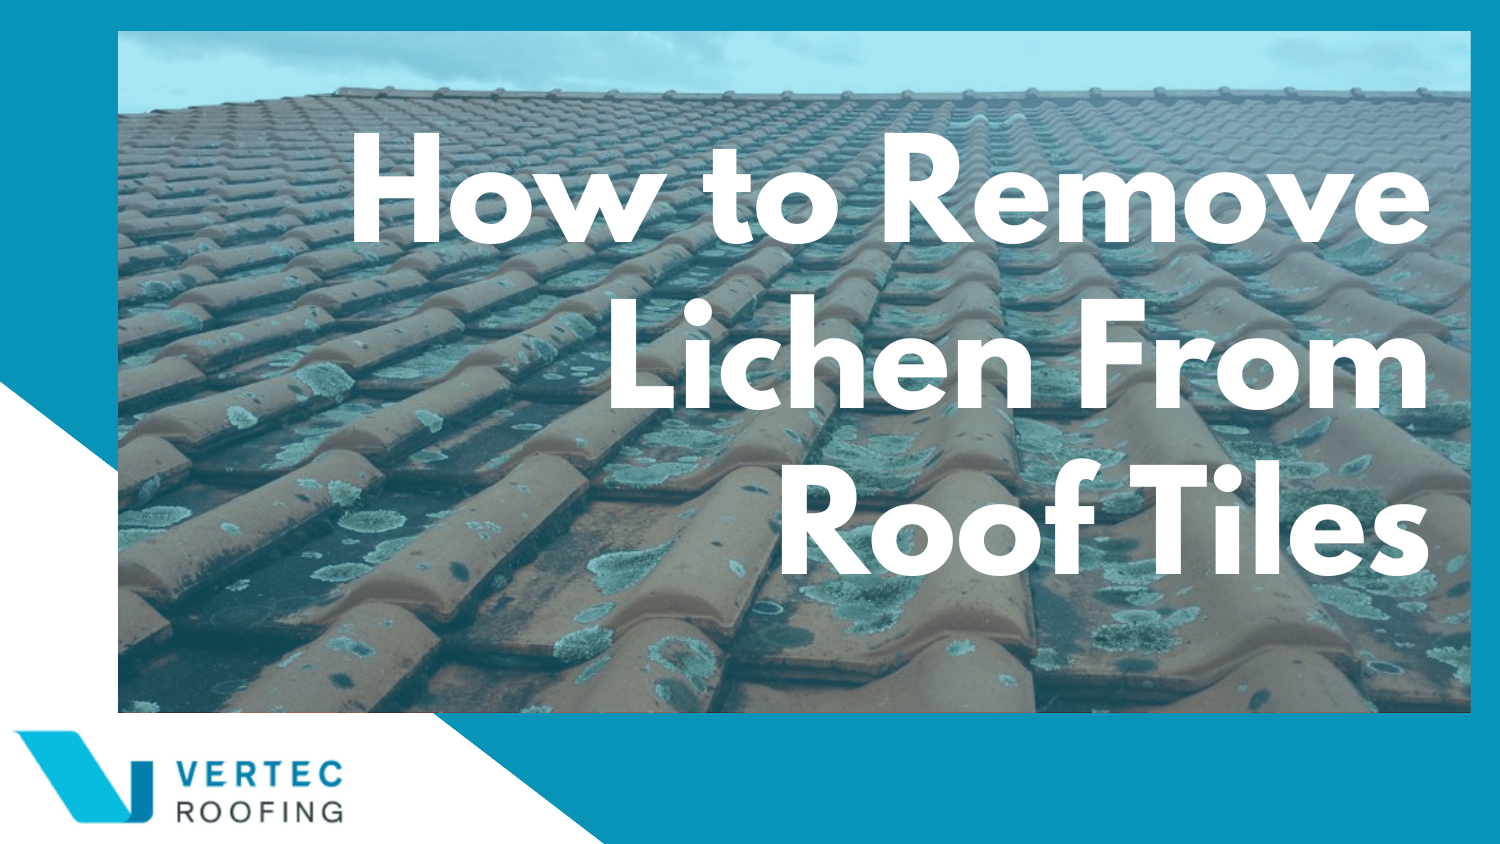 How to Remove Lichen from Roof Tiles